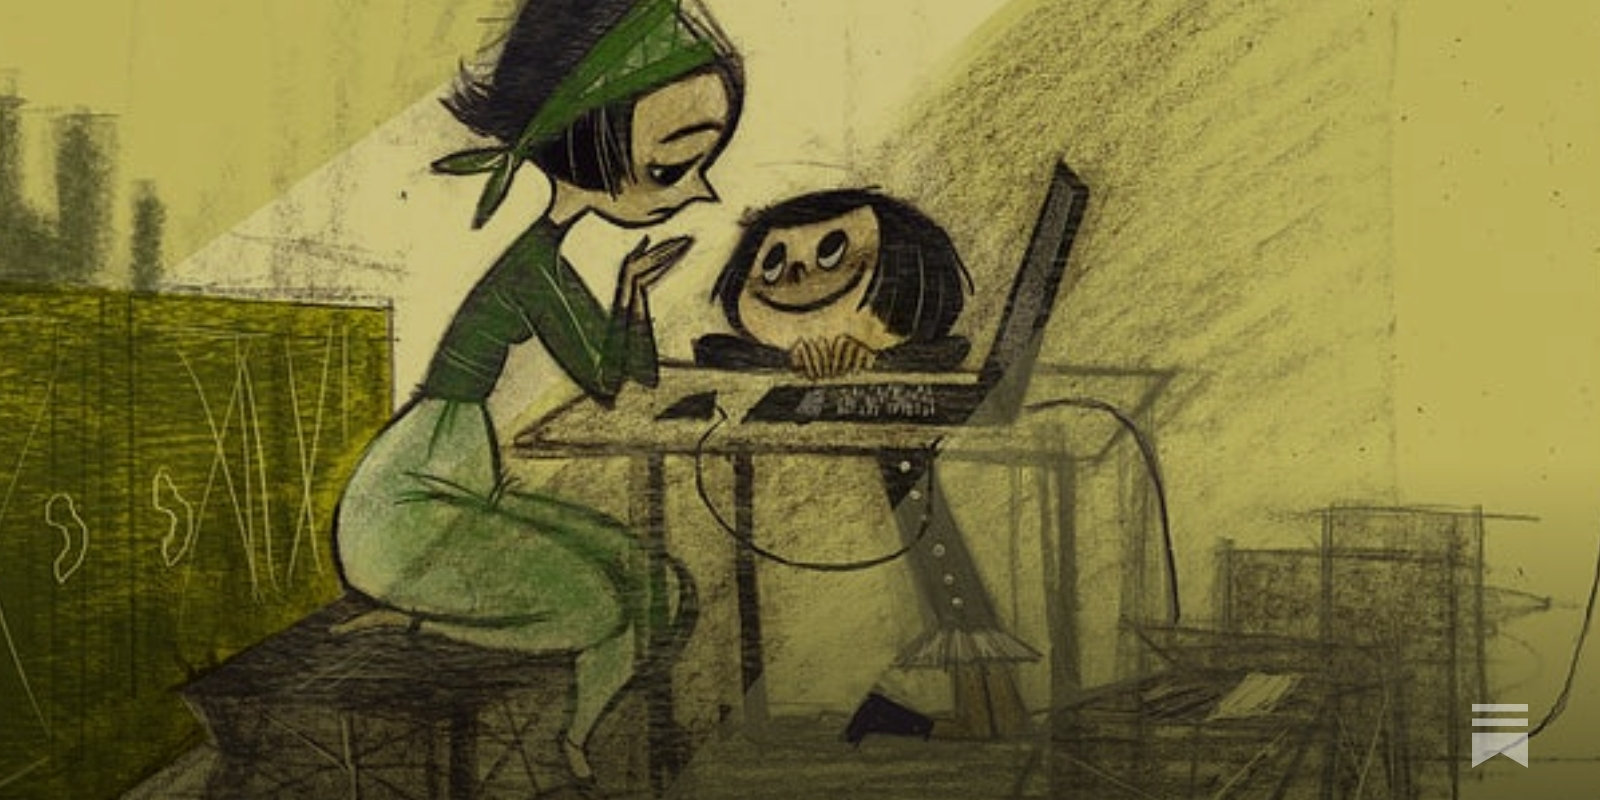 The (Unofficial) Art of 'Coraline